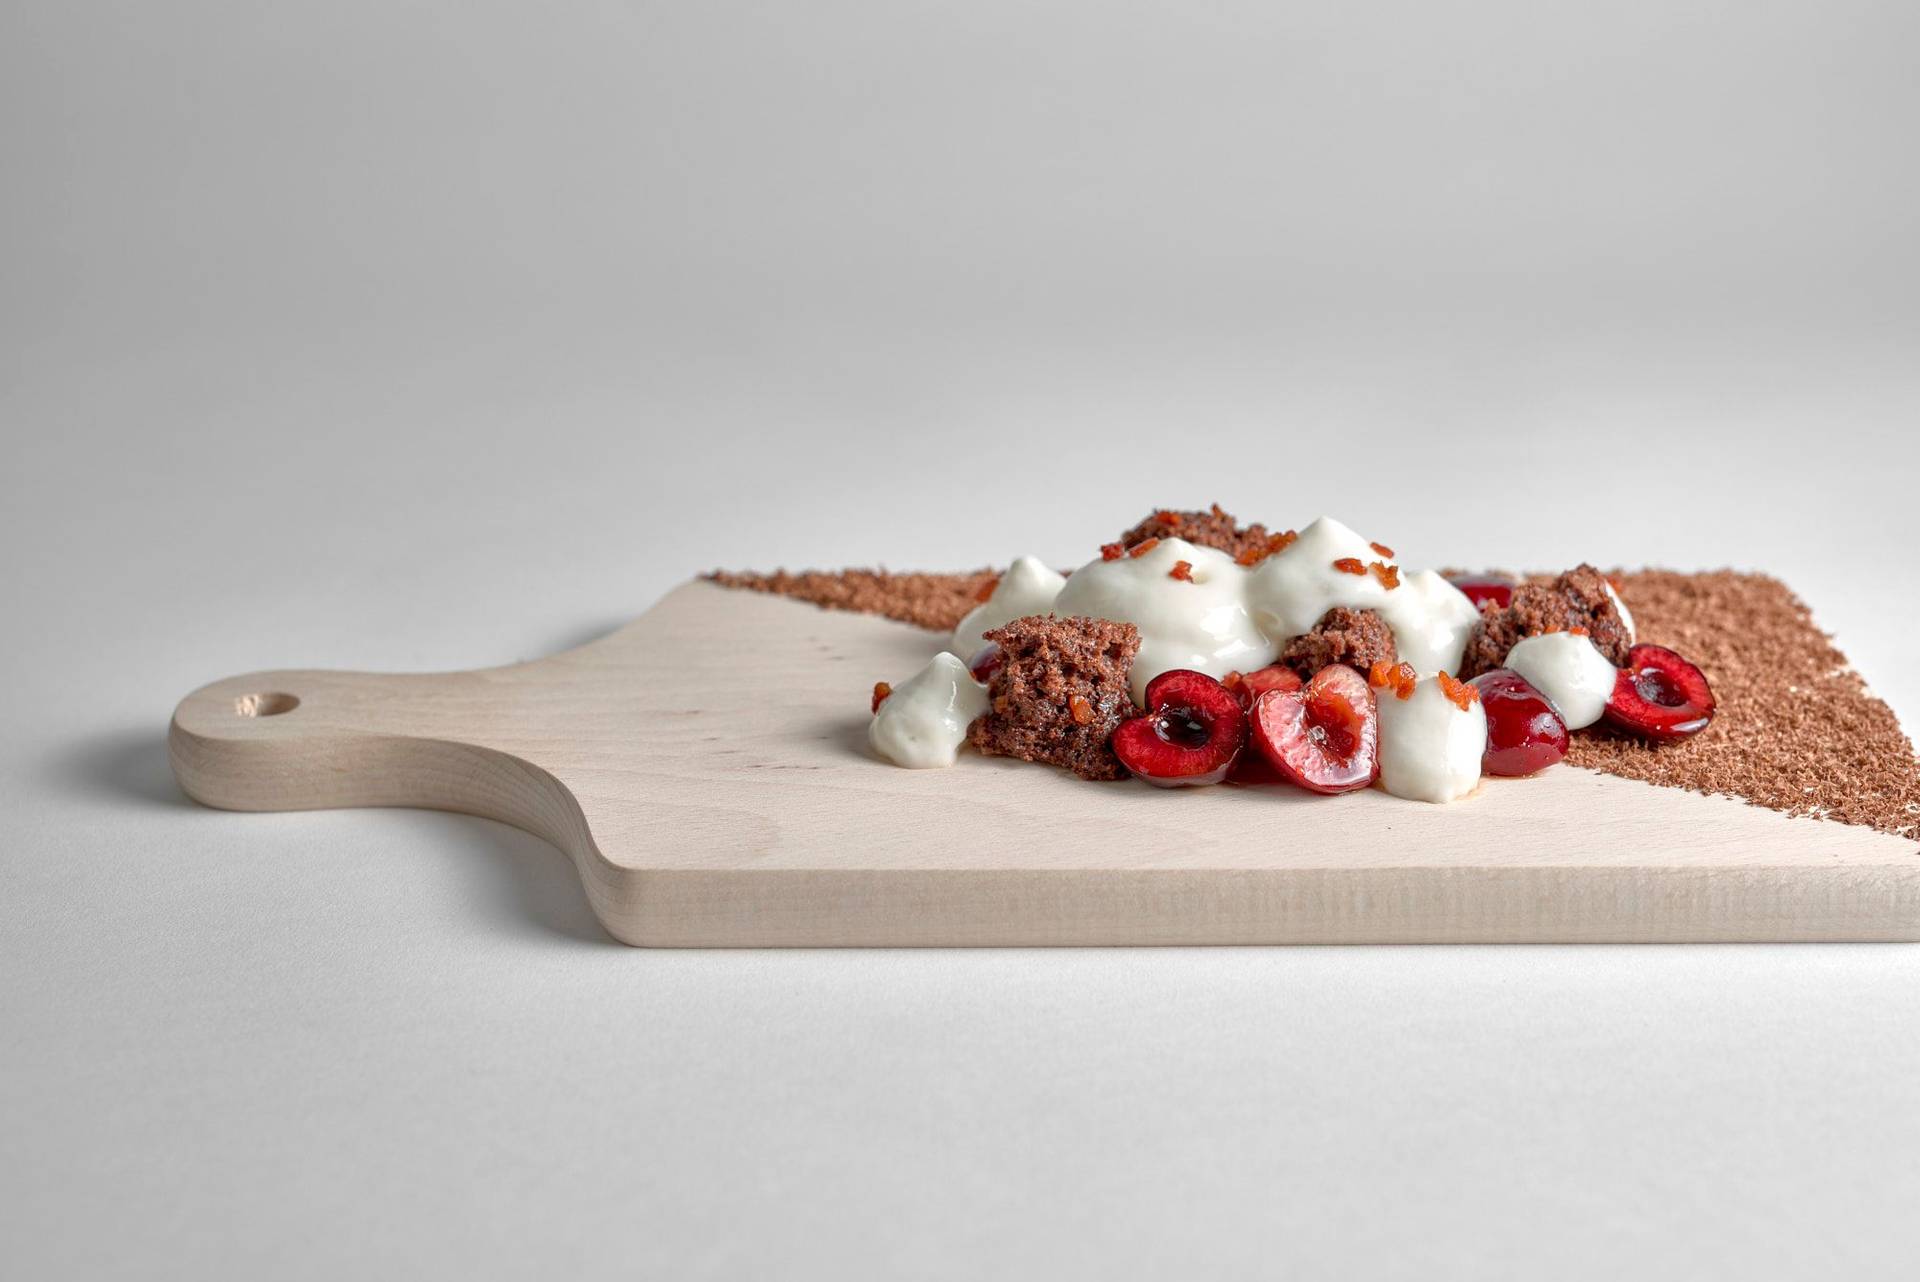 ayran black forest cake dessert with bacon on a wooden board with white background